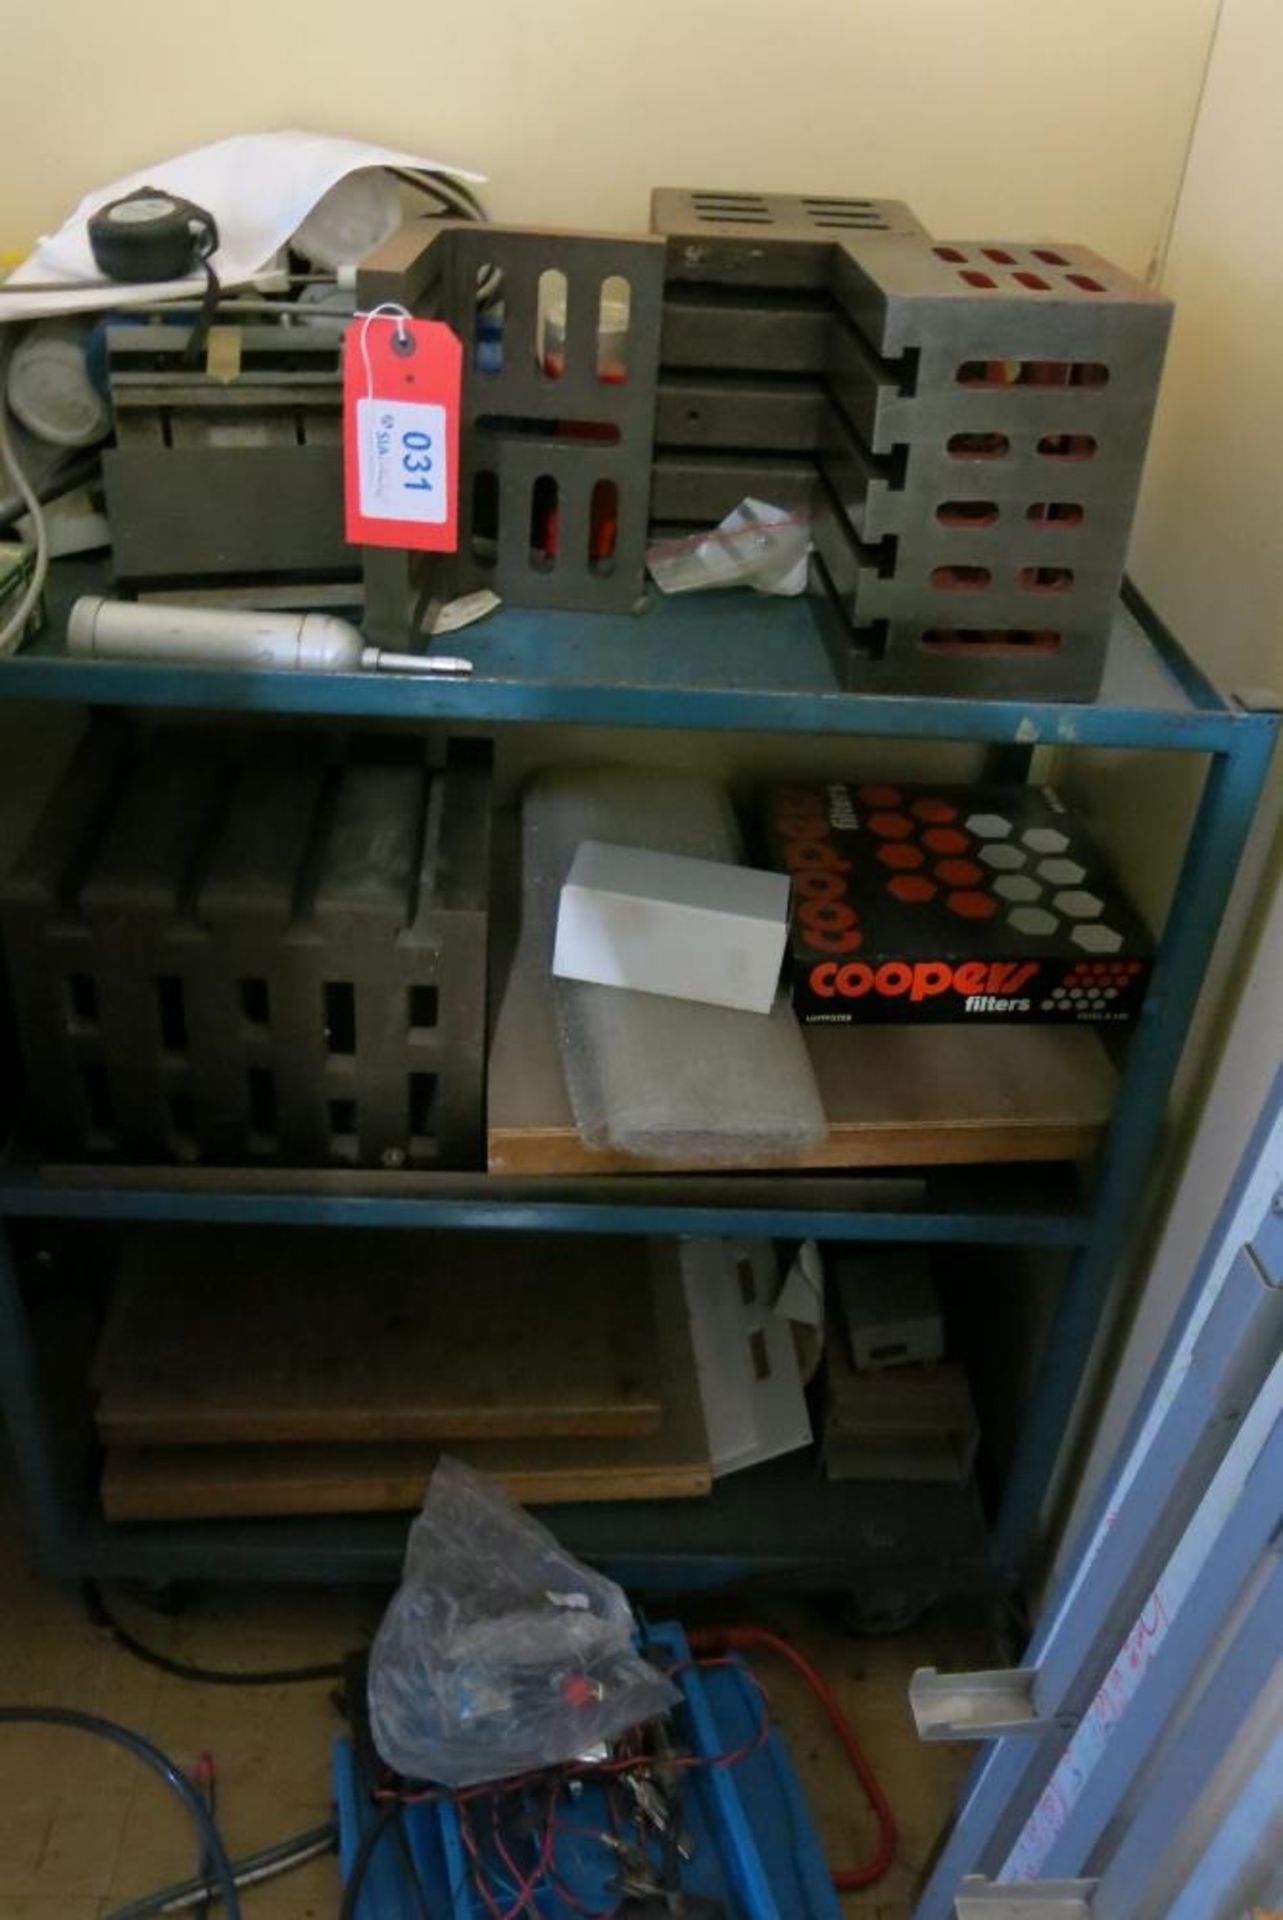 Contents of trolley to include (3) slotted machining blocks and (1) angle plate